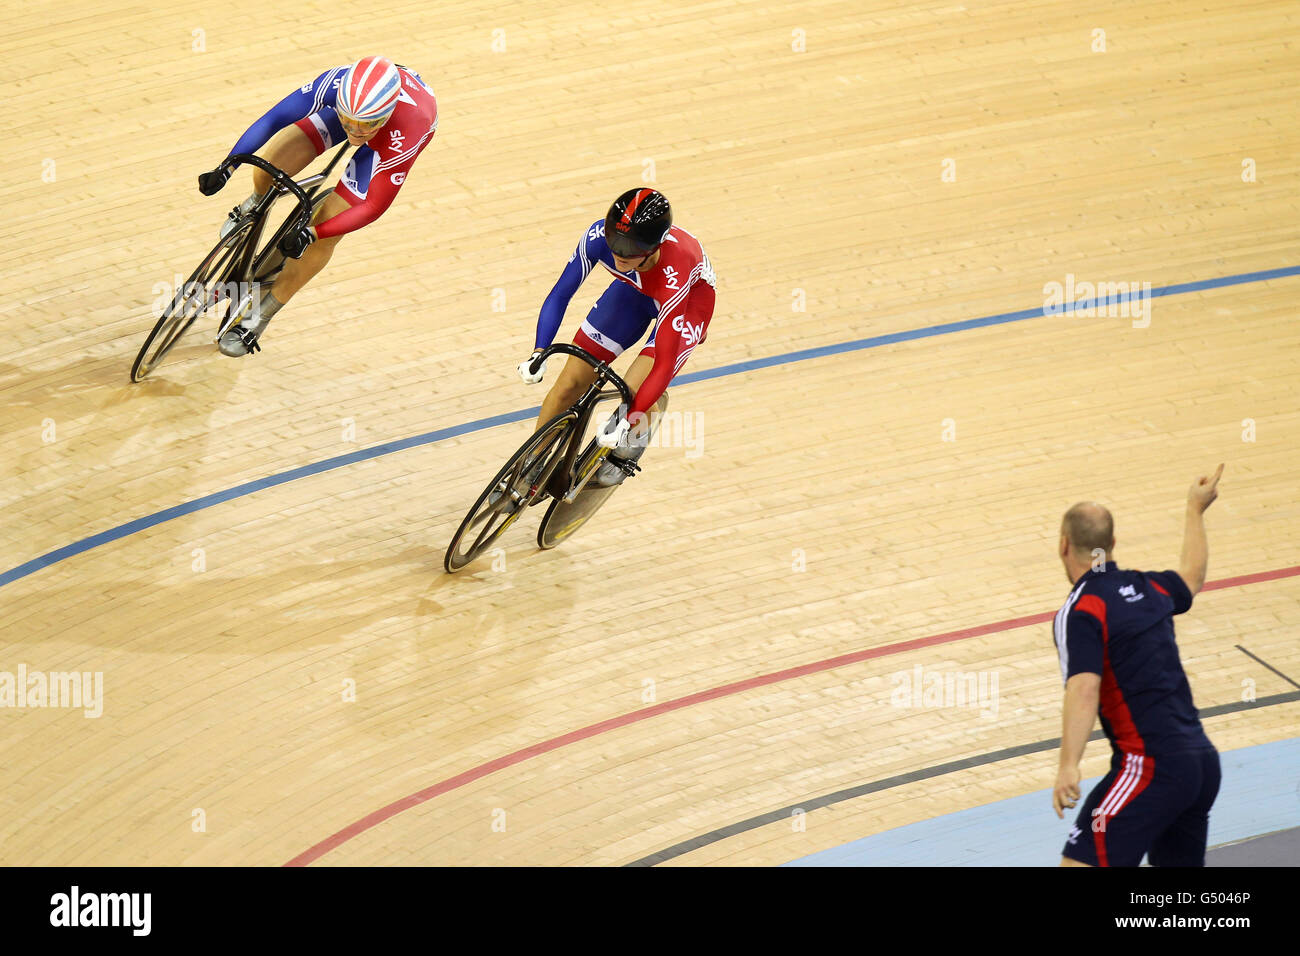 Cycling - UCI Track Cycling World Cup and Olympic Games Test Event - Day Two - Olympic Velodrome. Great Britain's Victoria Pendleton and Jess Varnish (left) compete during the Women's Sprint Quarter-Finals Stock Photo